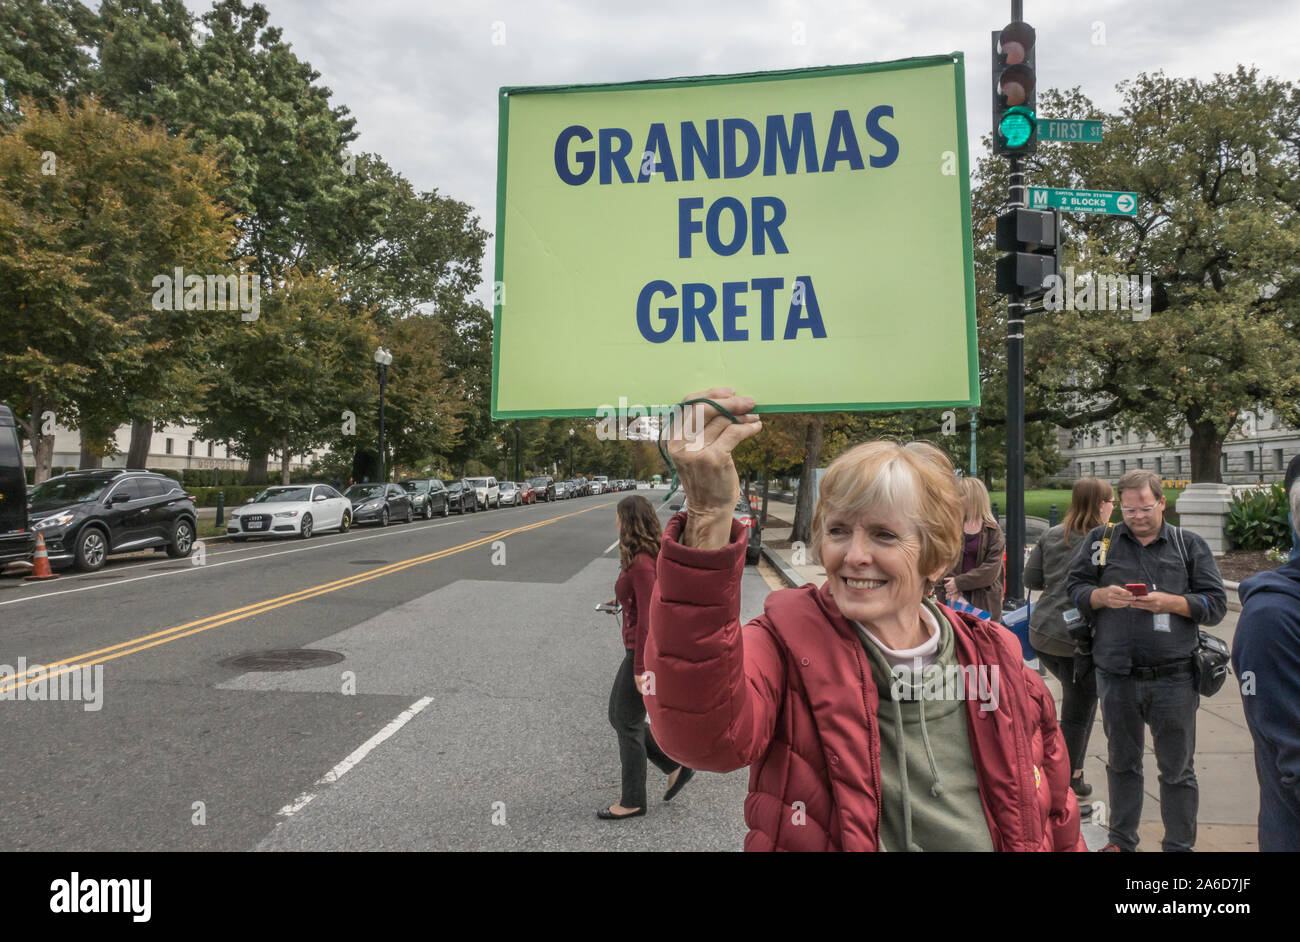 Washington, DC - Oct. 25, 2019: Supporter of Greta Thunberg at actress and activist Jane Fonda's ongoing Fire Drill Friday protest at the U.S. Capitol demanding government action on climate change and ending reliance on 'corrupt' fossil fuel industry. demonstration. Stock Photo